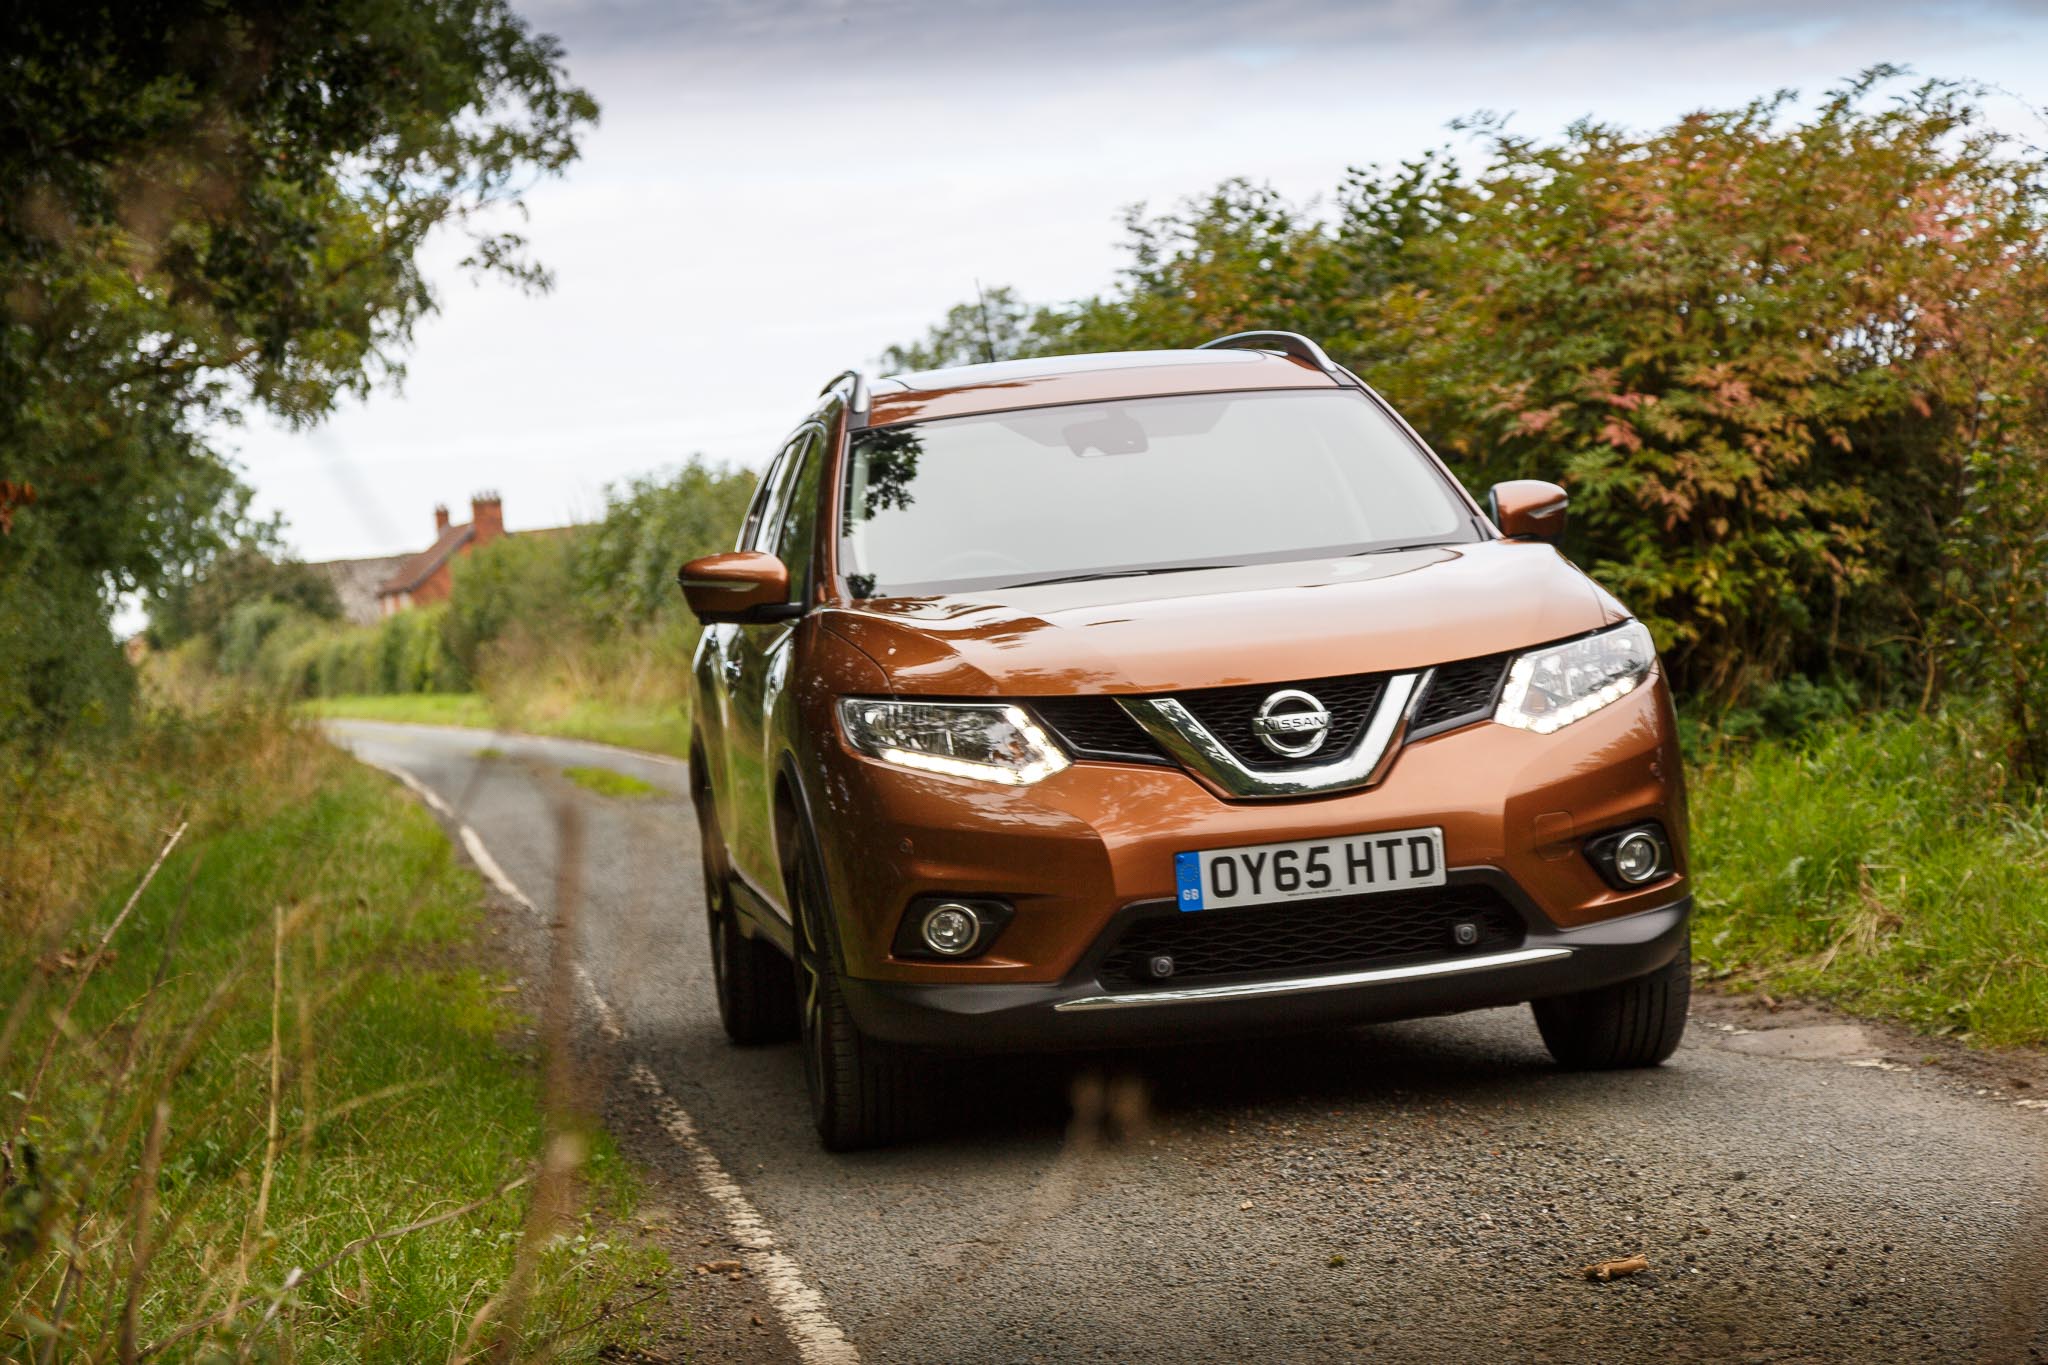 nissan-rogue-problems-things-you-should-know-about-before-buying